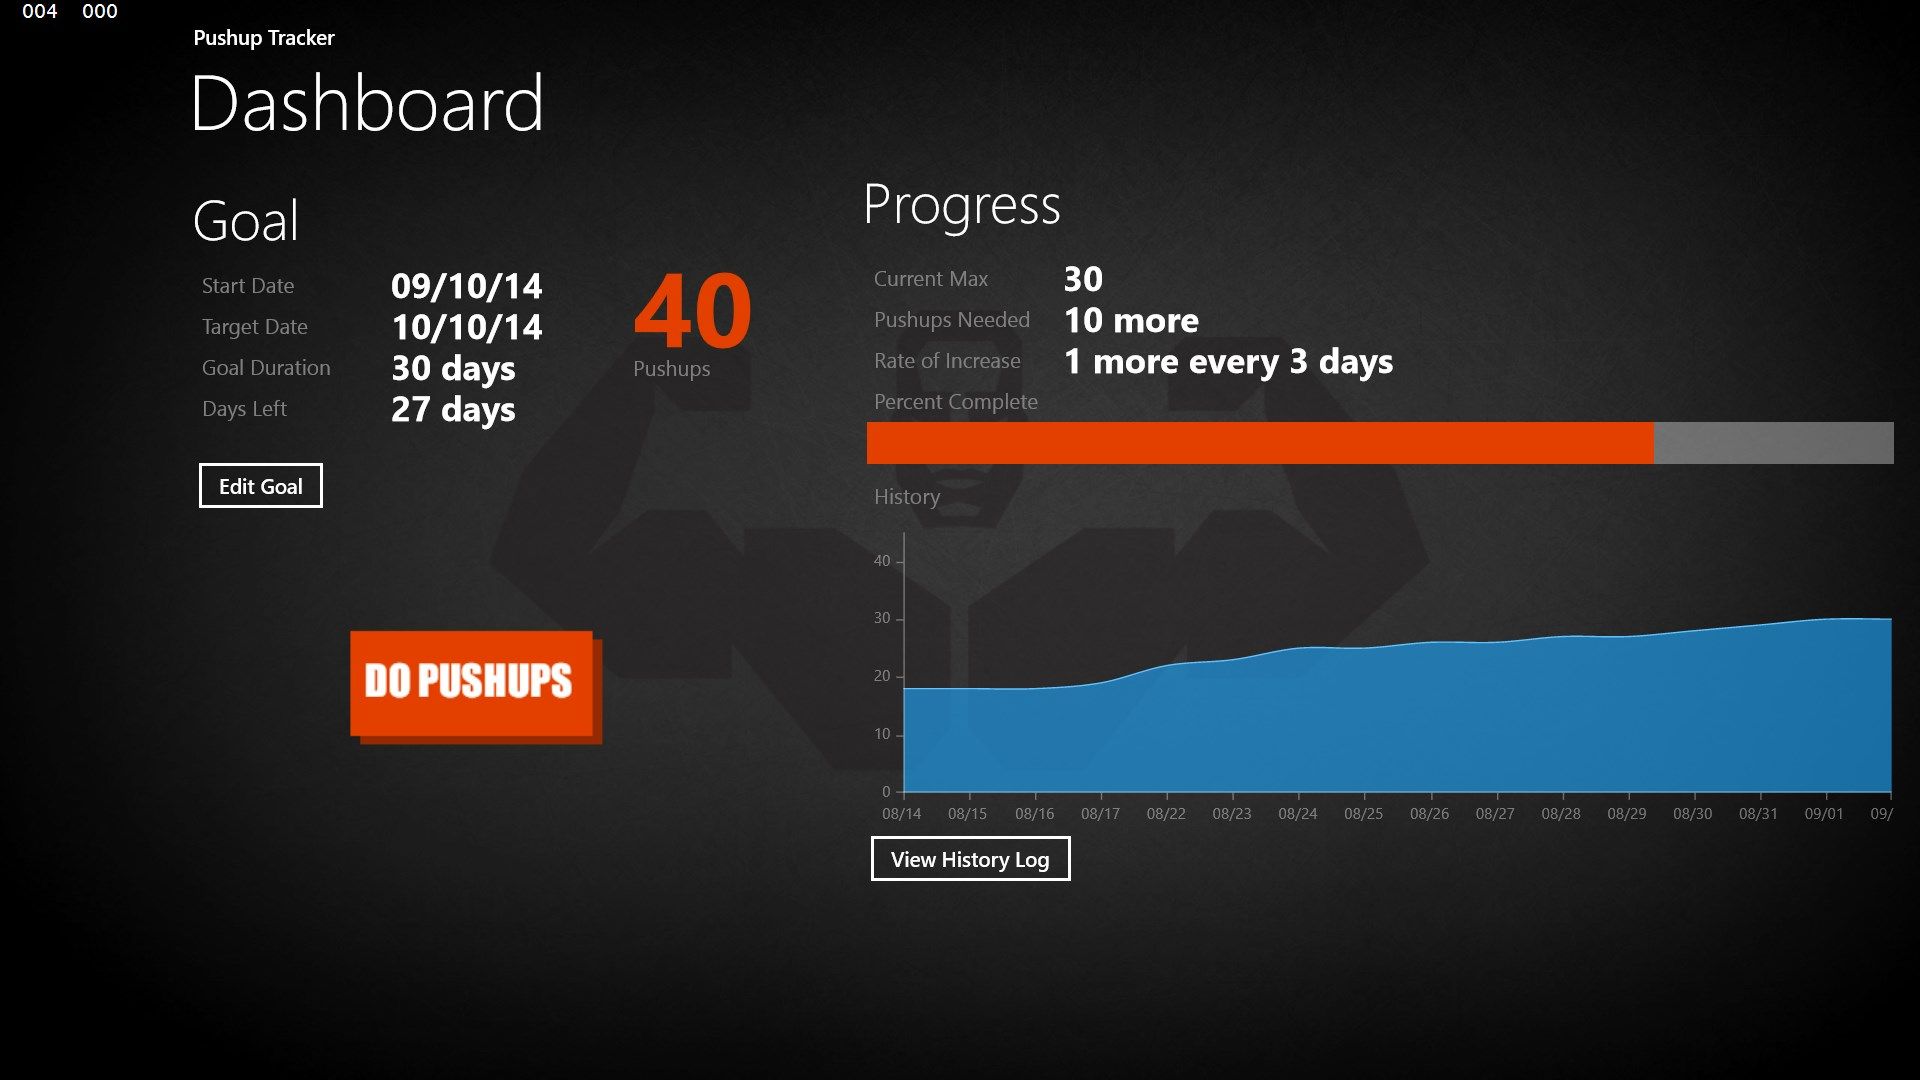 Dashboard with goal and progress information